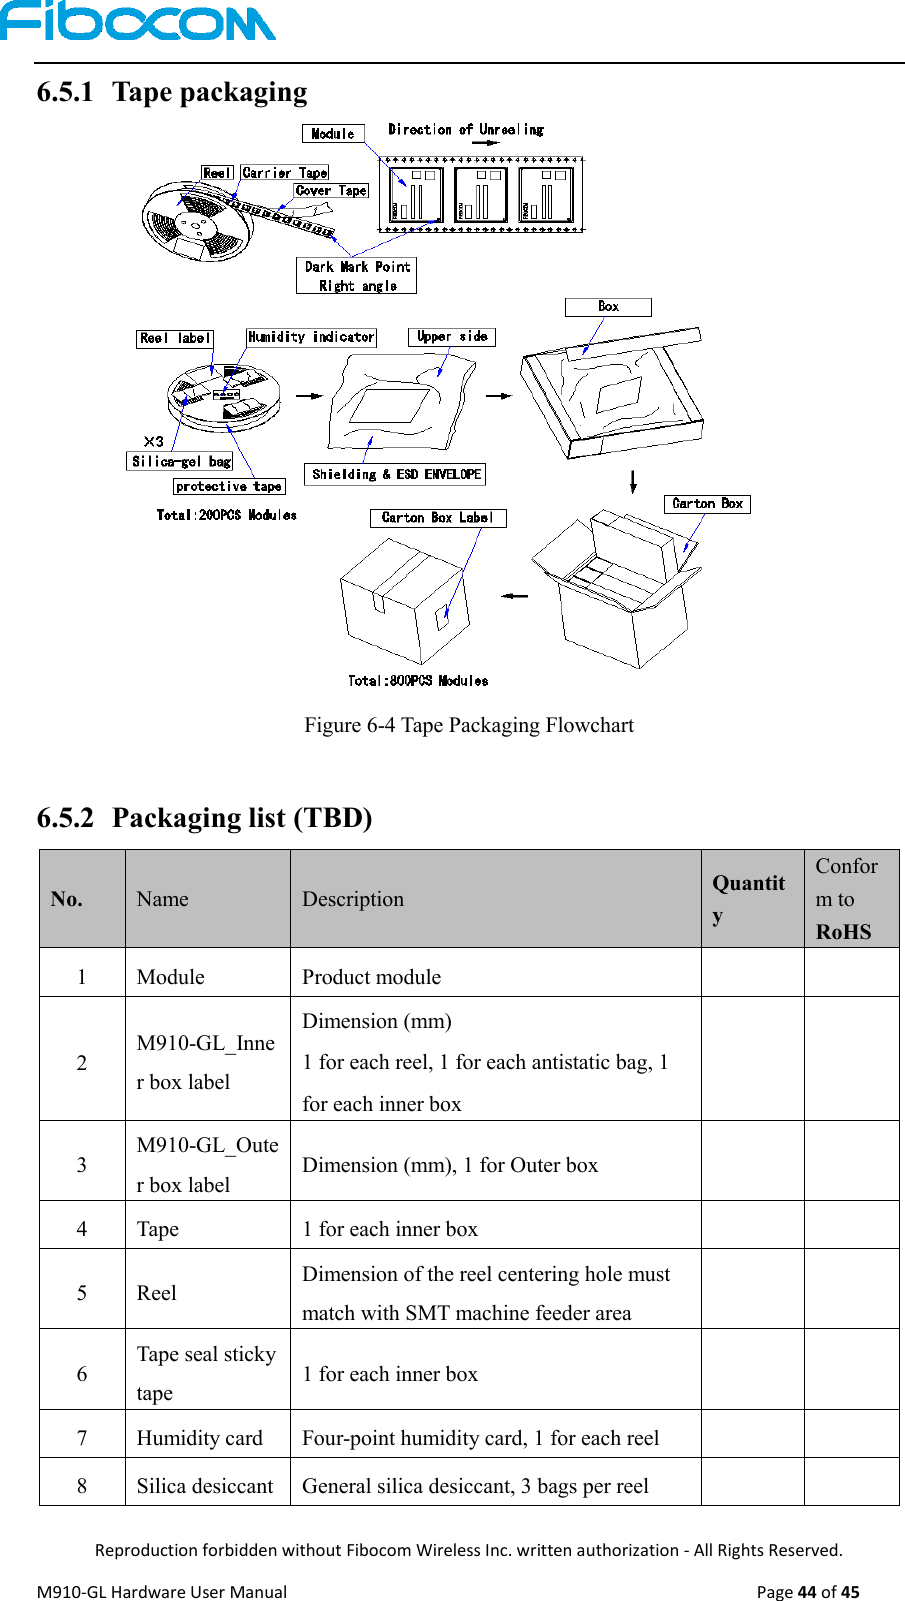  Reproduction forbidden without Fibocom Wireless Inc. written authorization - All Rights Reserved. M910-GL Hardware User Manual                                                                                                  Page 44 of 45  6.5.1 Tape packaging Figure 6-4 Tape Packaging Flowchart        6.5.2 Packaging list (TBD) No. Name Description Quantity Conform to RoHS 1 Module Product module   2 M910-GL_Inner box label Dimension (mm) 1 for each reel, 1 for each antistatic bag, 1 for each inner box   3 M910-GL_Outer box label Dimension (mm), 1 for Outer box   4 Tape 1 for each inner box   5 Reel Dimension of the reel centering hole must match with SMT machine feeder area   6 Tape seal sticky tape 1 for each inner box   7 Humidity card Four-point humidity card, 1 for each reel   8 Silica desiccant General silica desiccant, 3 bags per reel   